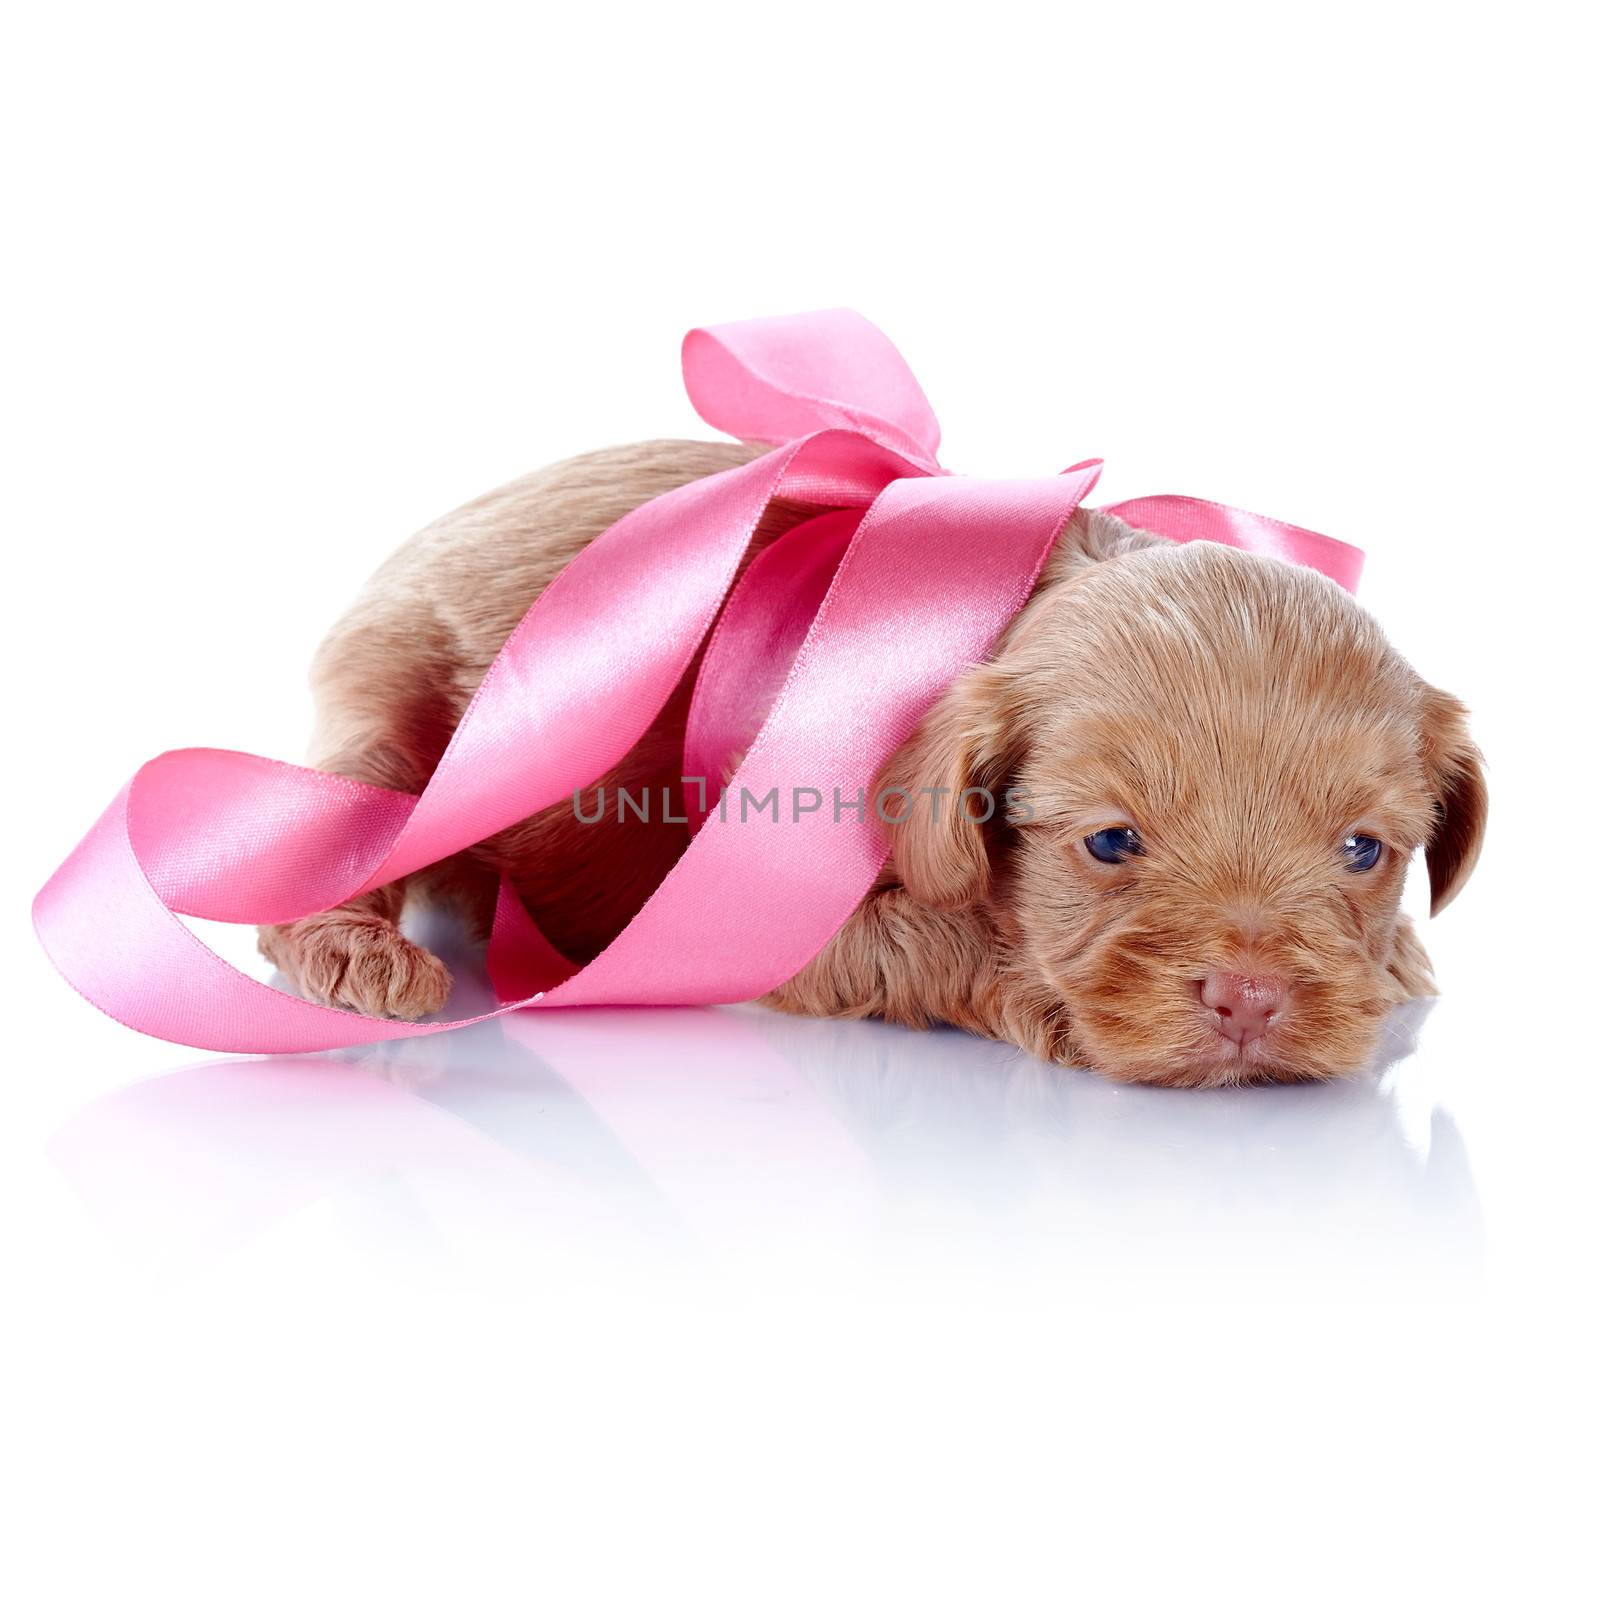 Puppy with a pink bow. Puppy of a decorative doggie. Decorative dog. Puppy of the Petersburg orchid on a white background